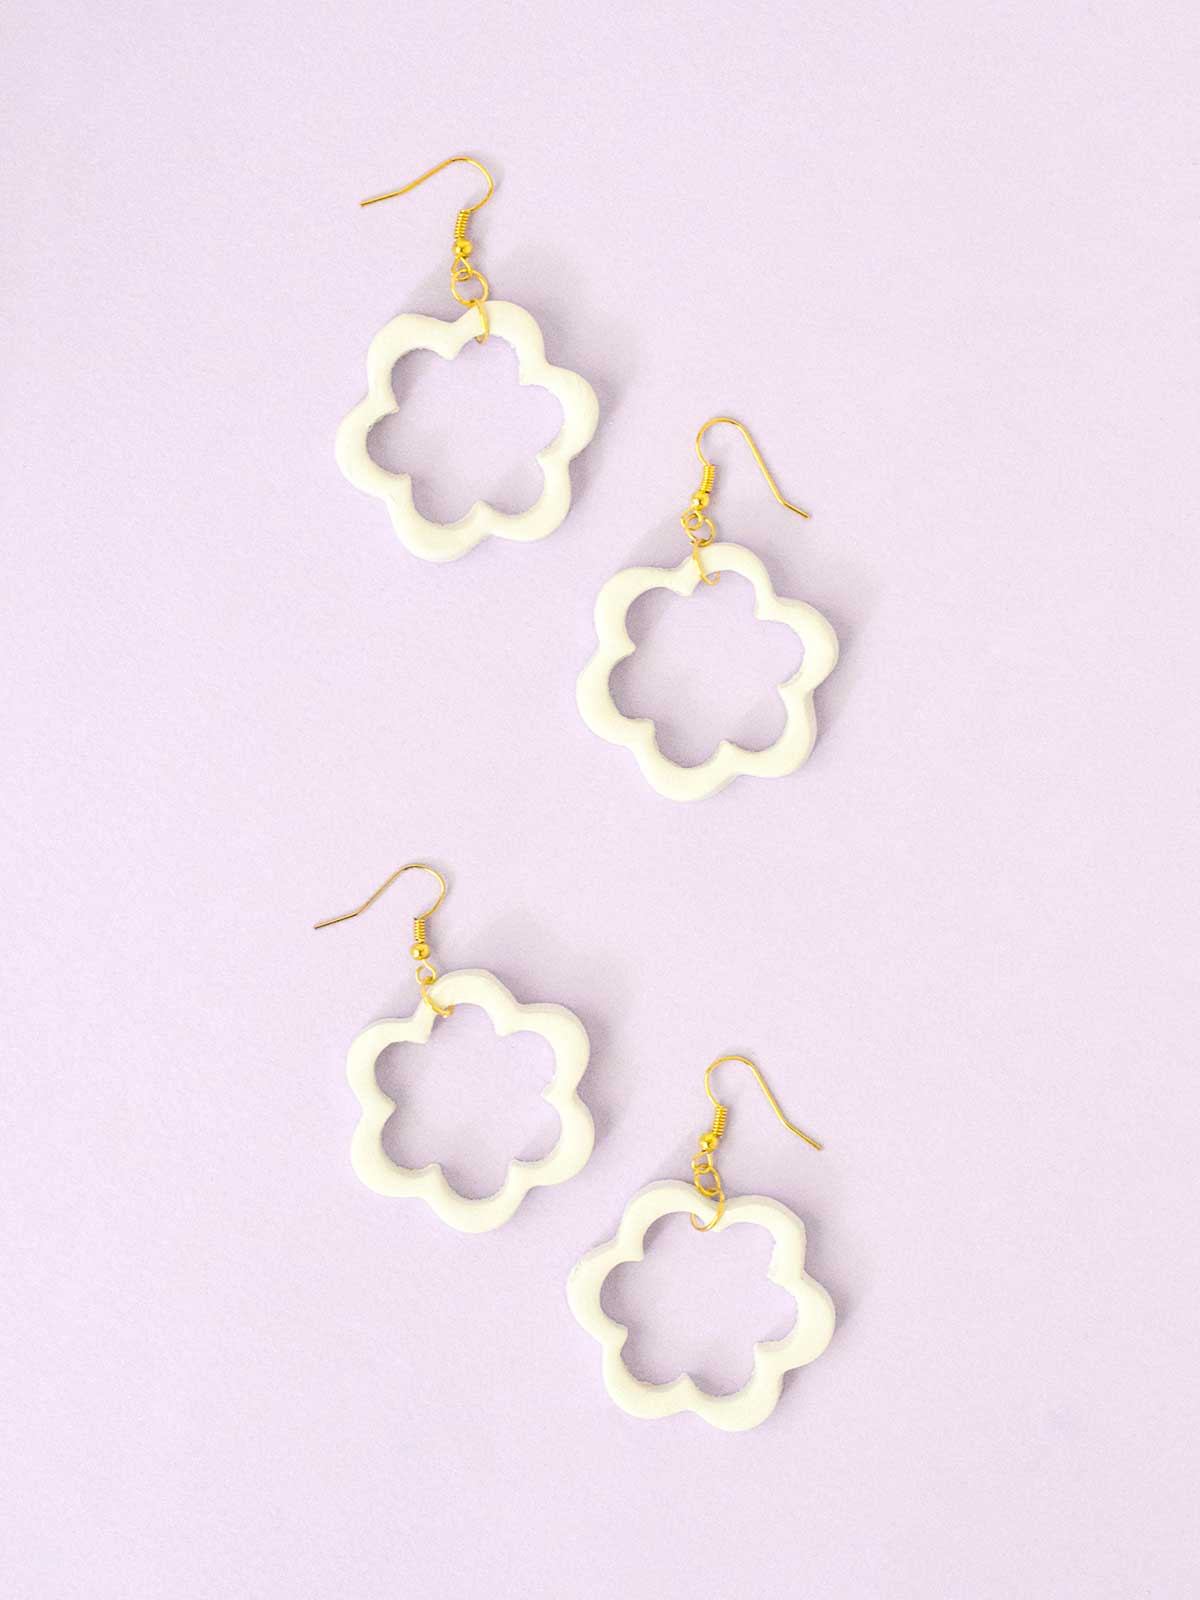 Elegant Floral Shaped Earring Art Idea With Polymer Clay Polymer Clay Earrings 